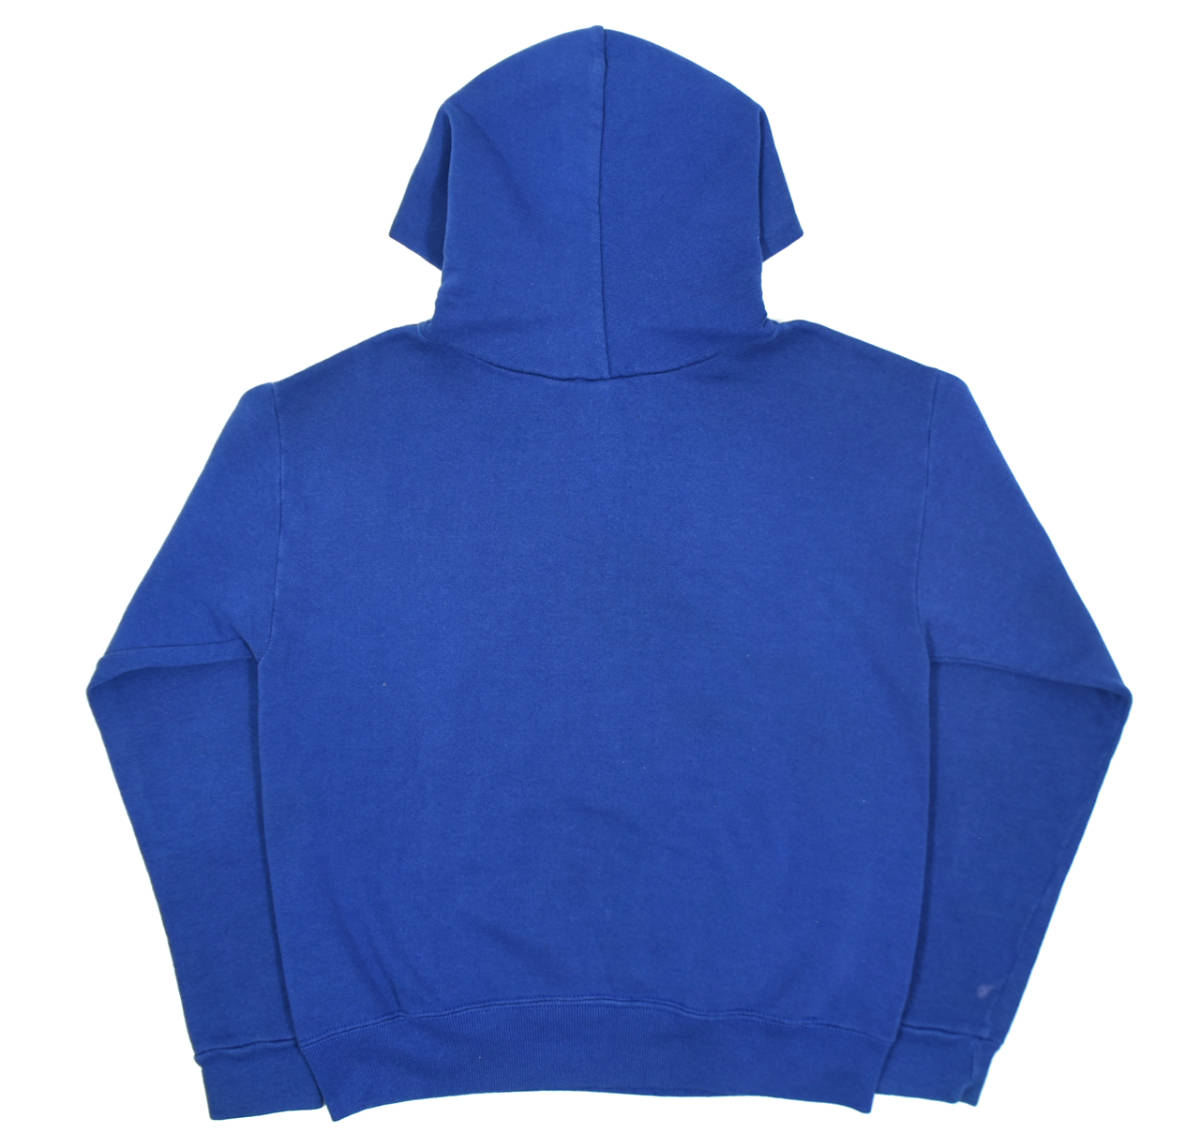 USA製 1980s SOUTH BOWIE Sweat hoodie L Blue ヴィンテージ スウェットフーディー パーカ ブルー×イエロー_画像2